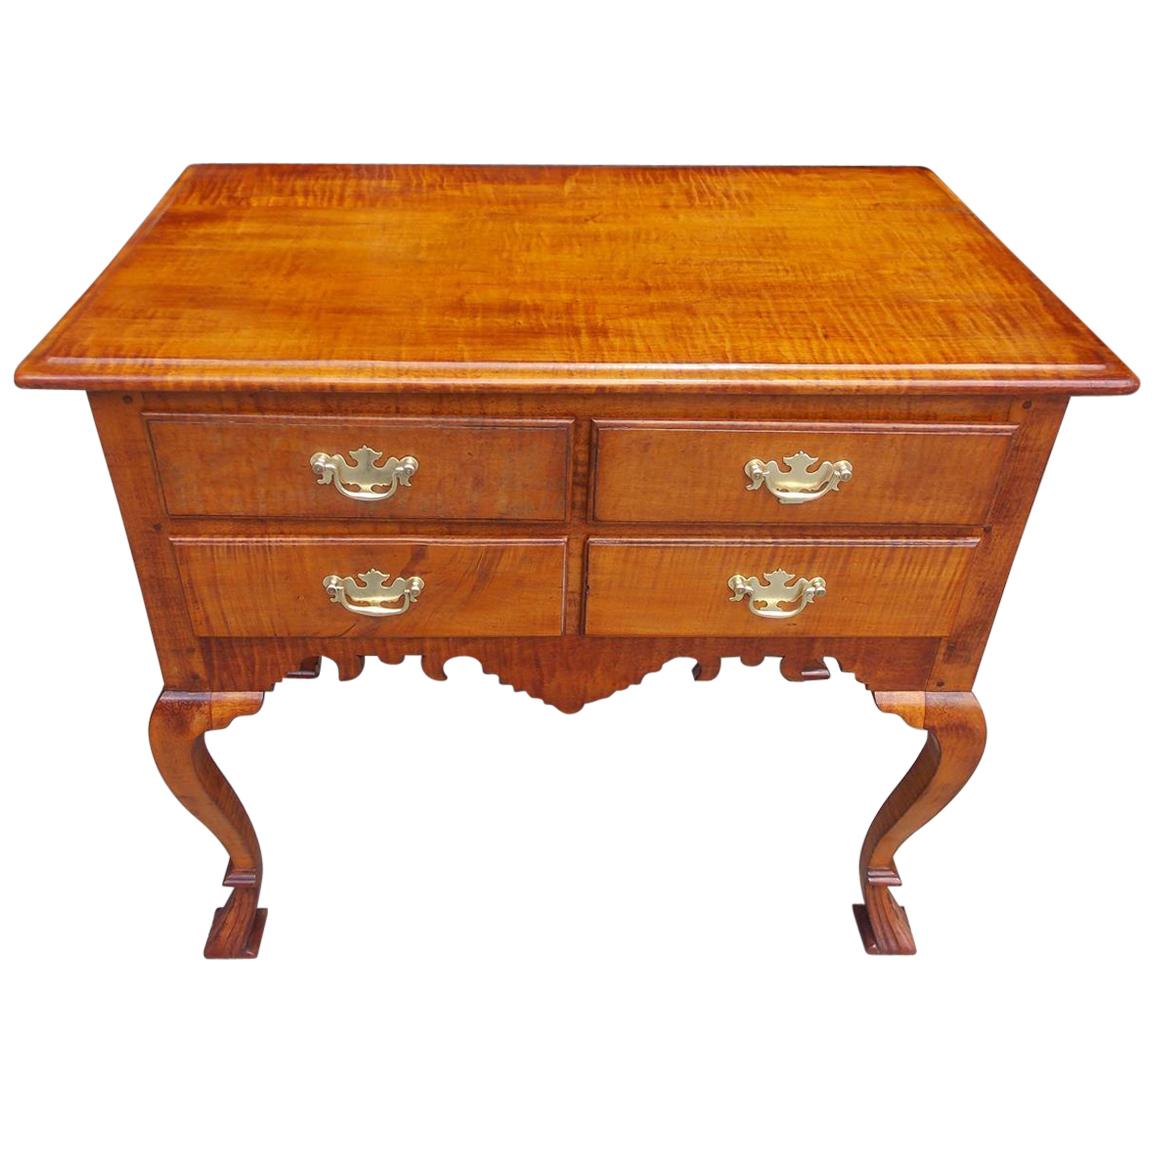 American Queen Anne Curley Maple Four Drawer Lowboy with Spanish Feet. C. 1750